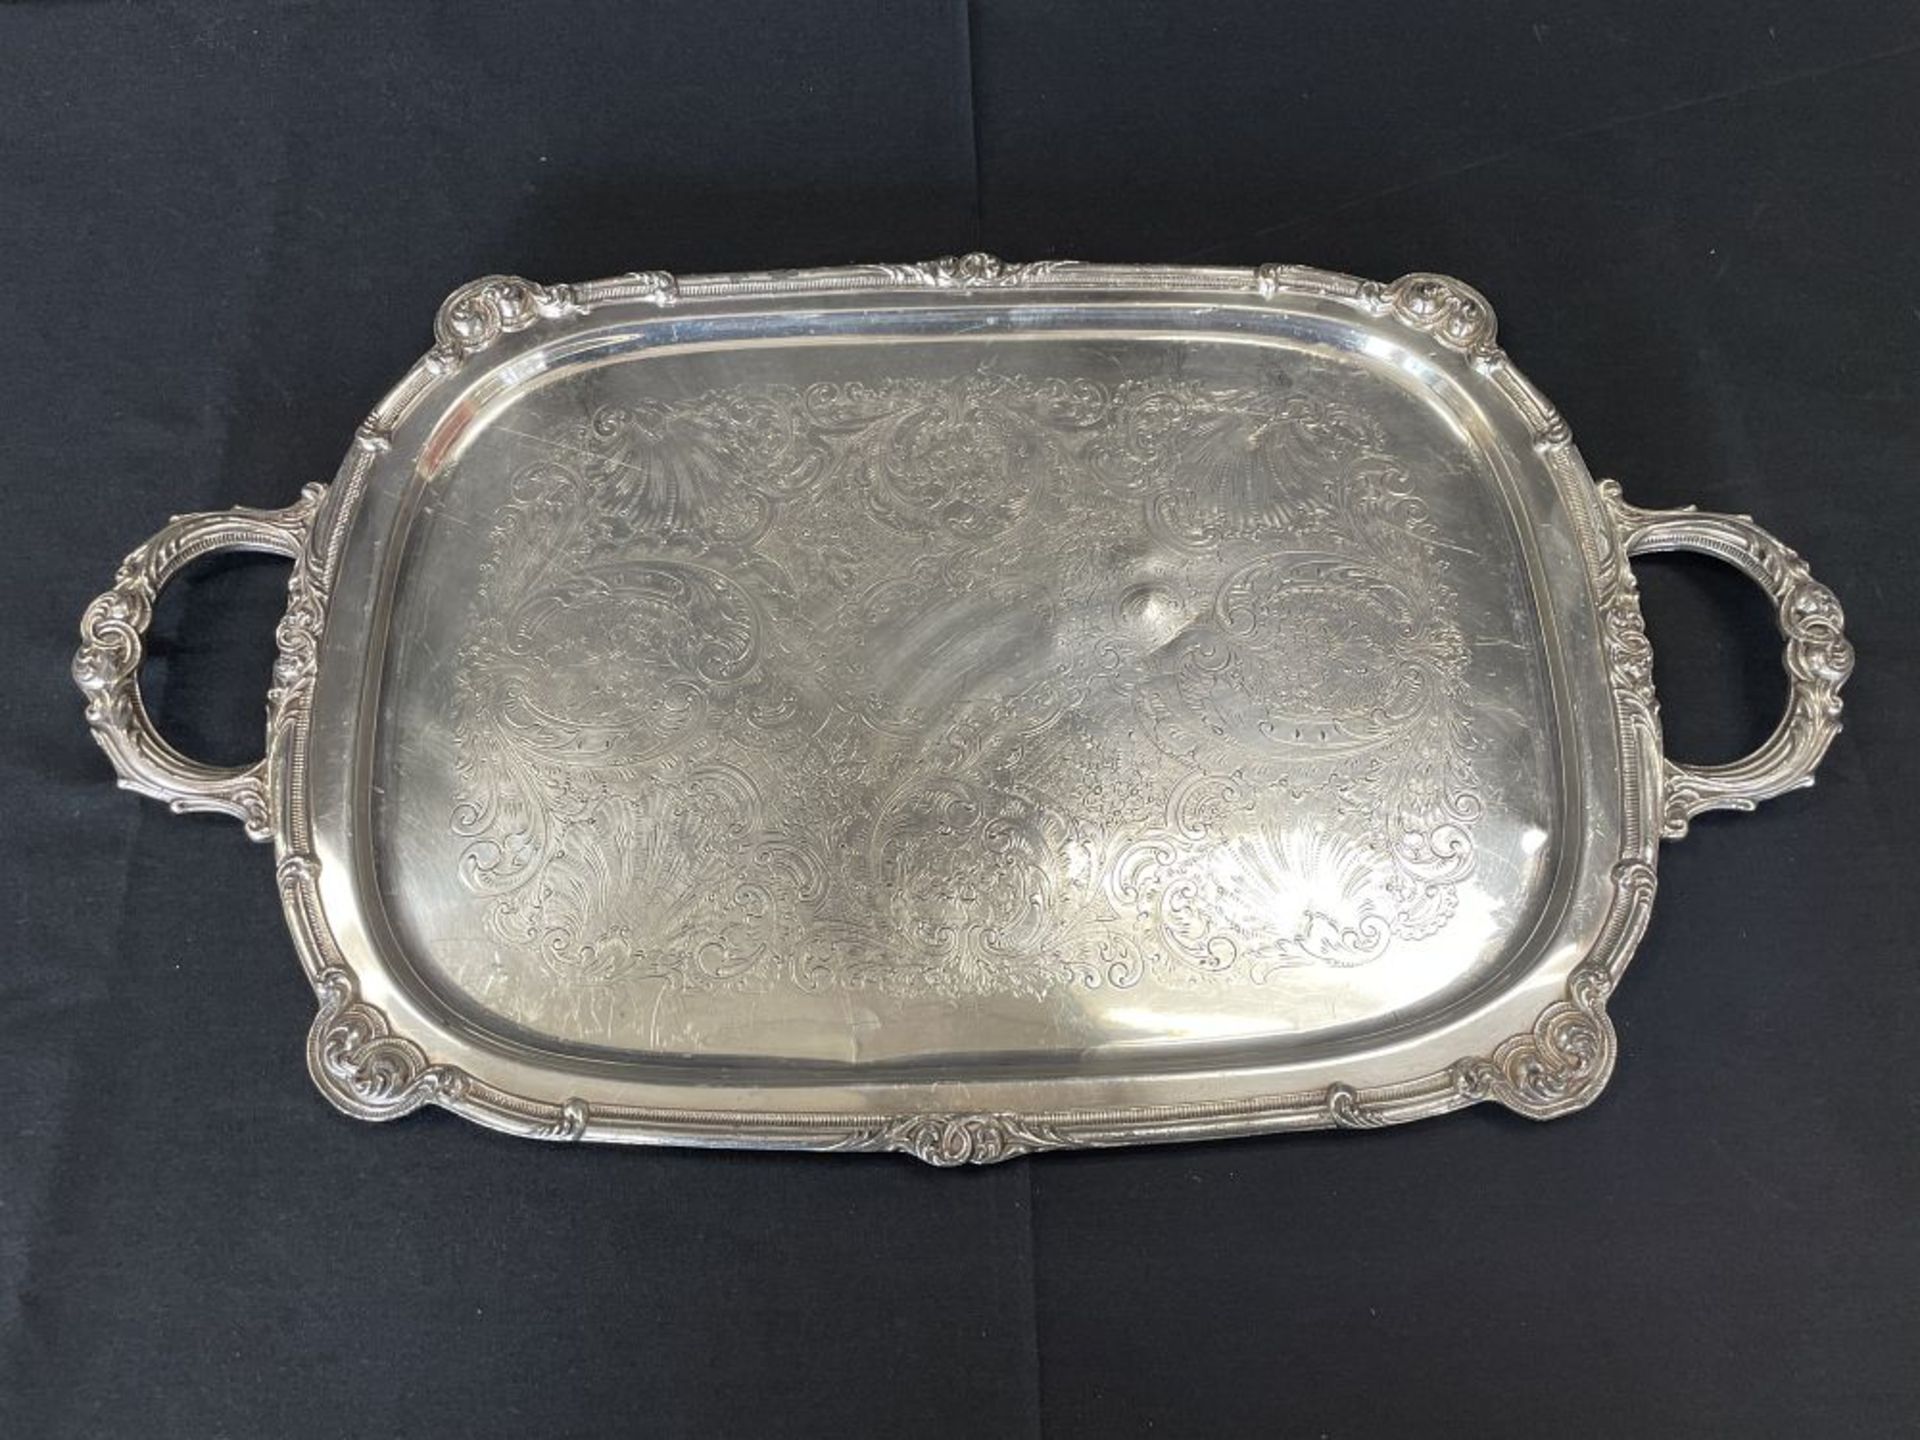 15" x 20.5" Handled Silver Plate Serving Tray